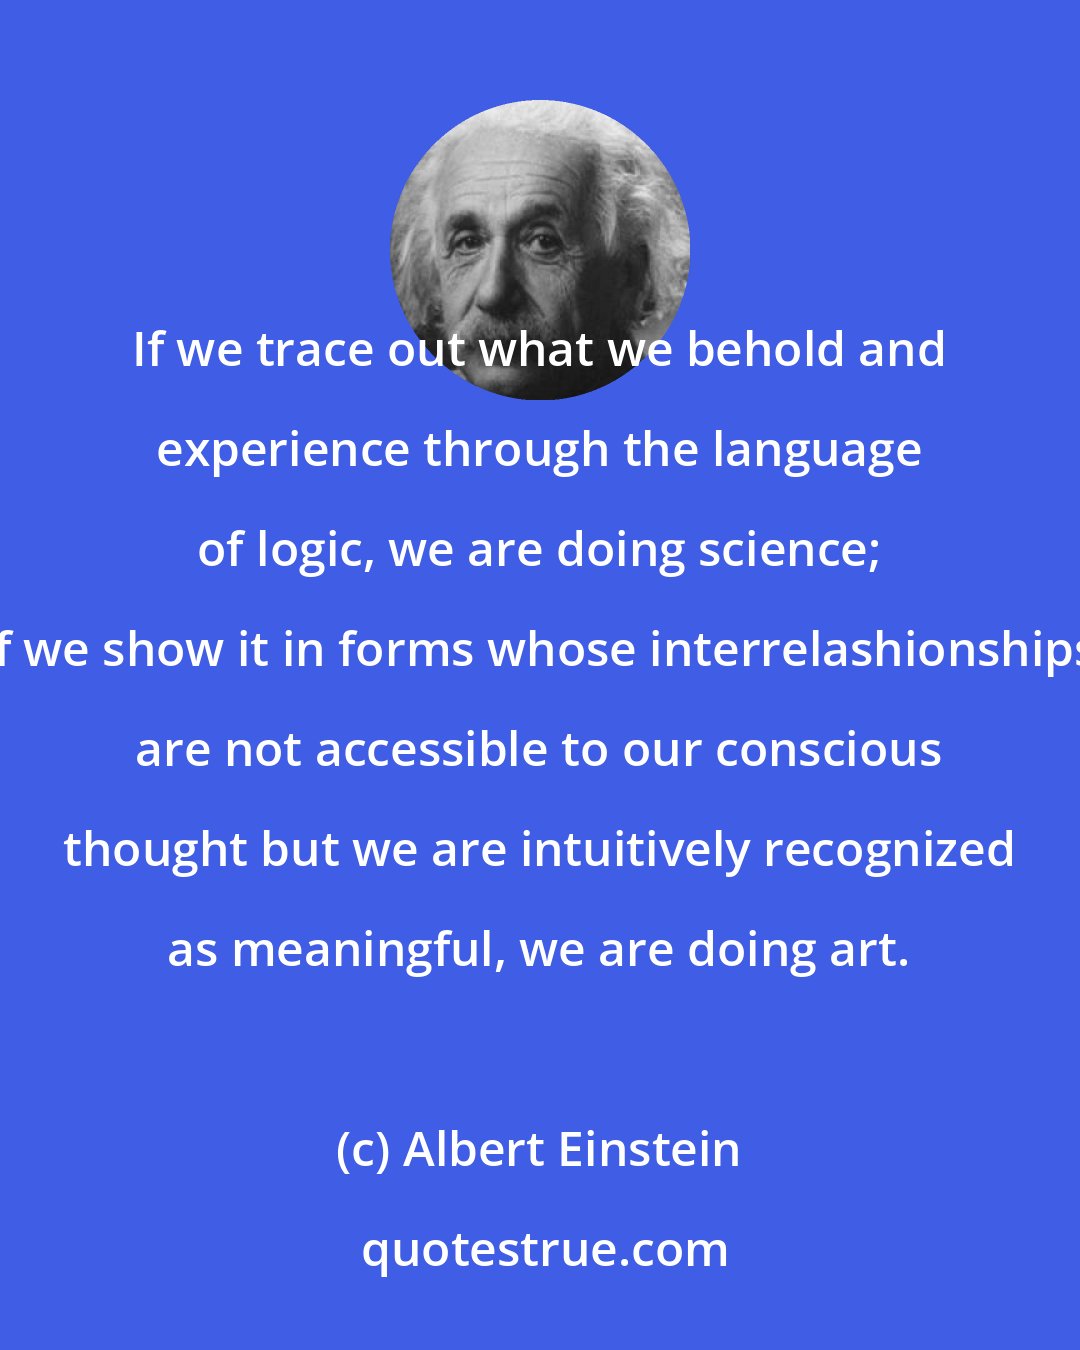 Albert Einstein: If we trace out what we behold and experience through the language of logic, we are doing science; if we show it in forms whose interrelashionships are not accessible to our conscious thought but we are intuitively recognized as meaningful, we are doing art.